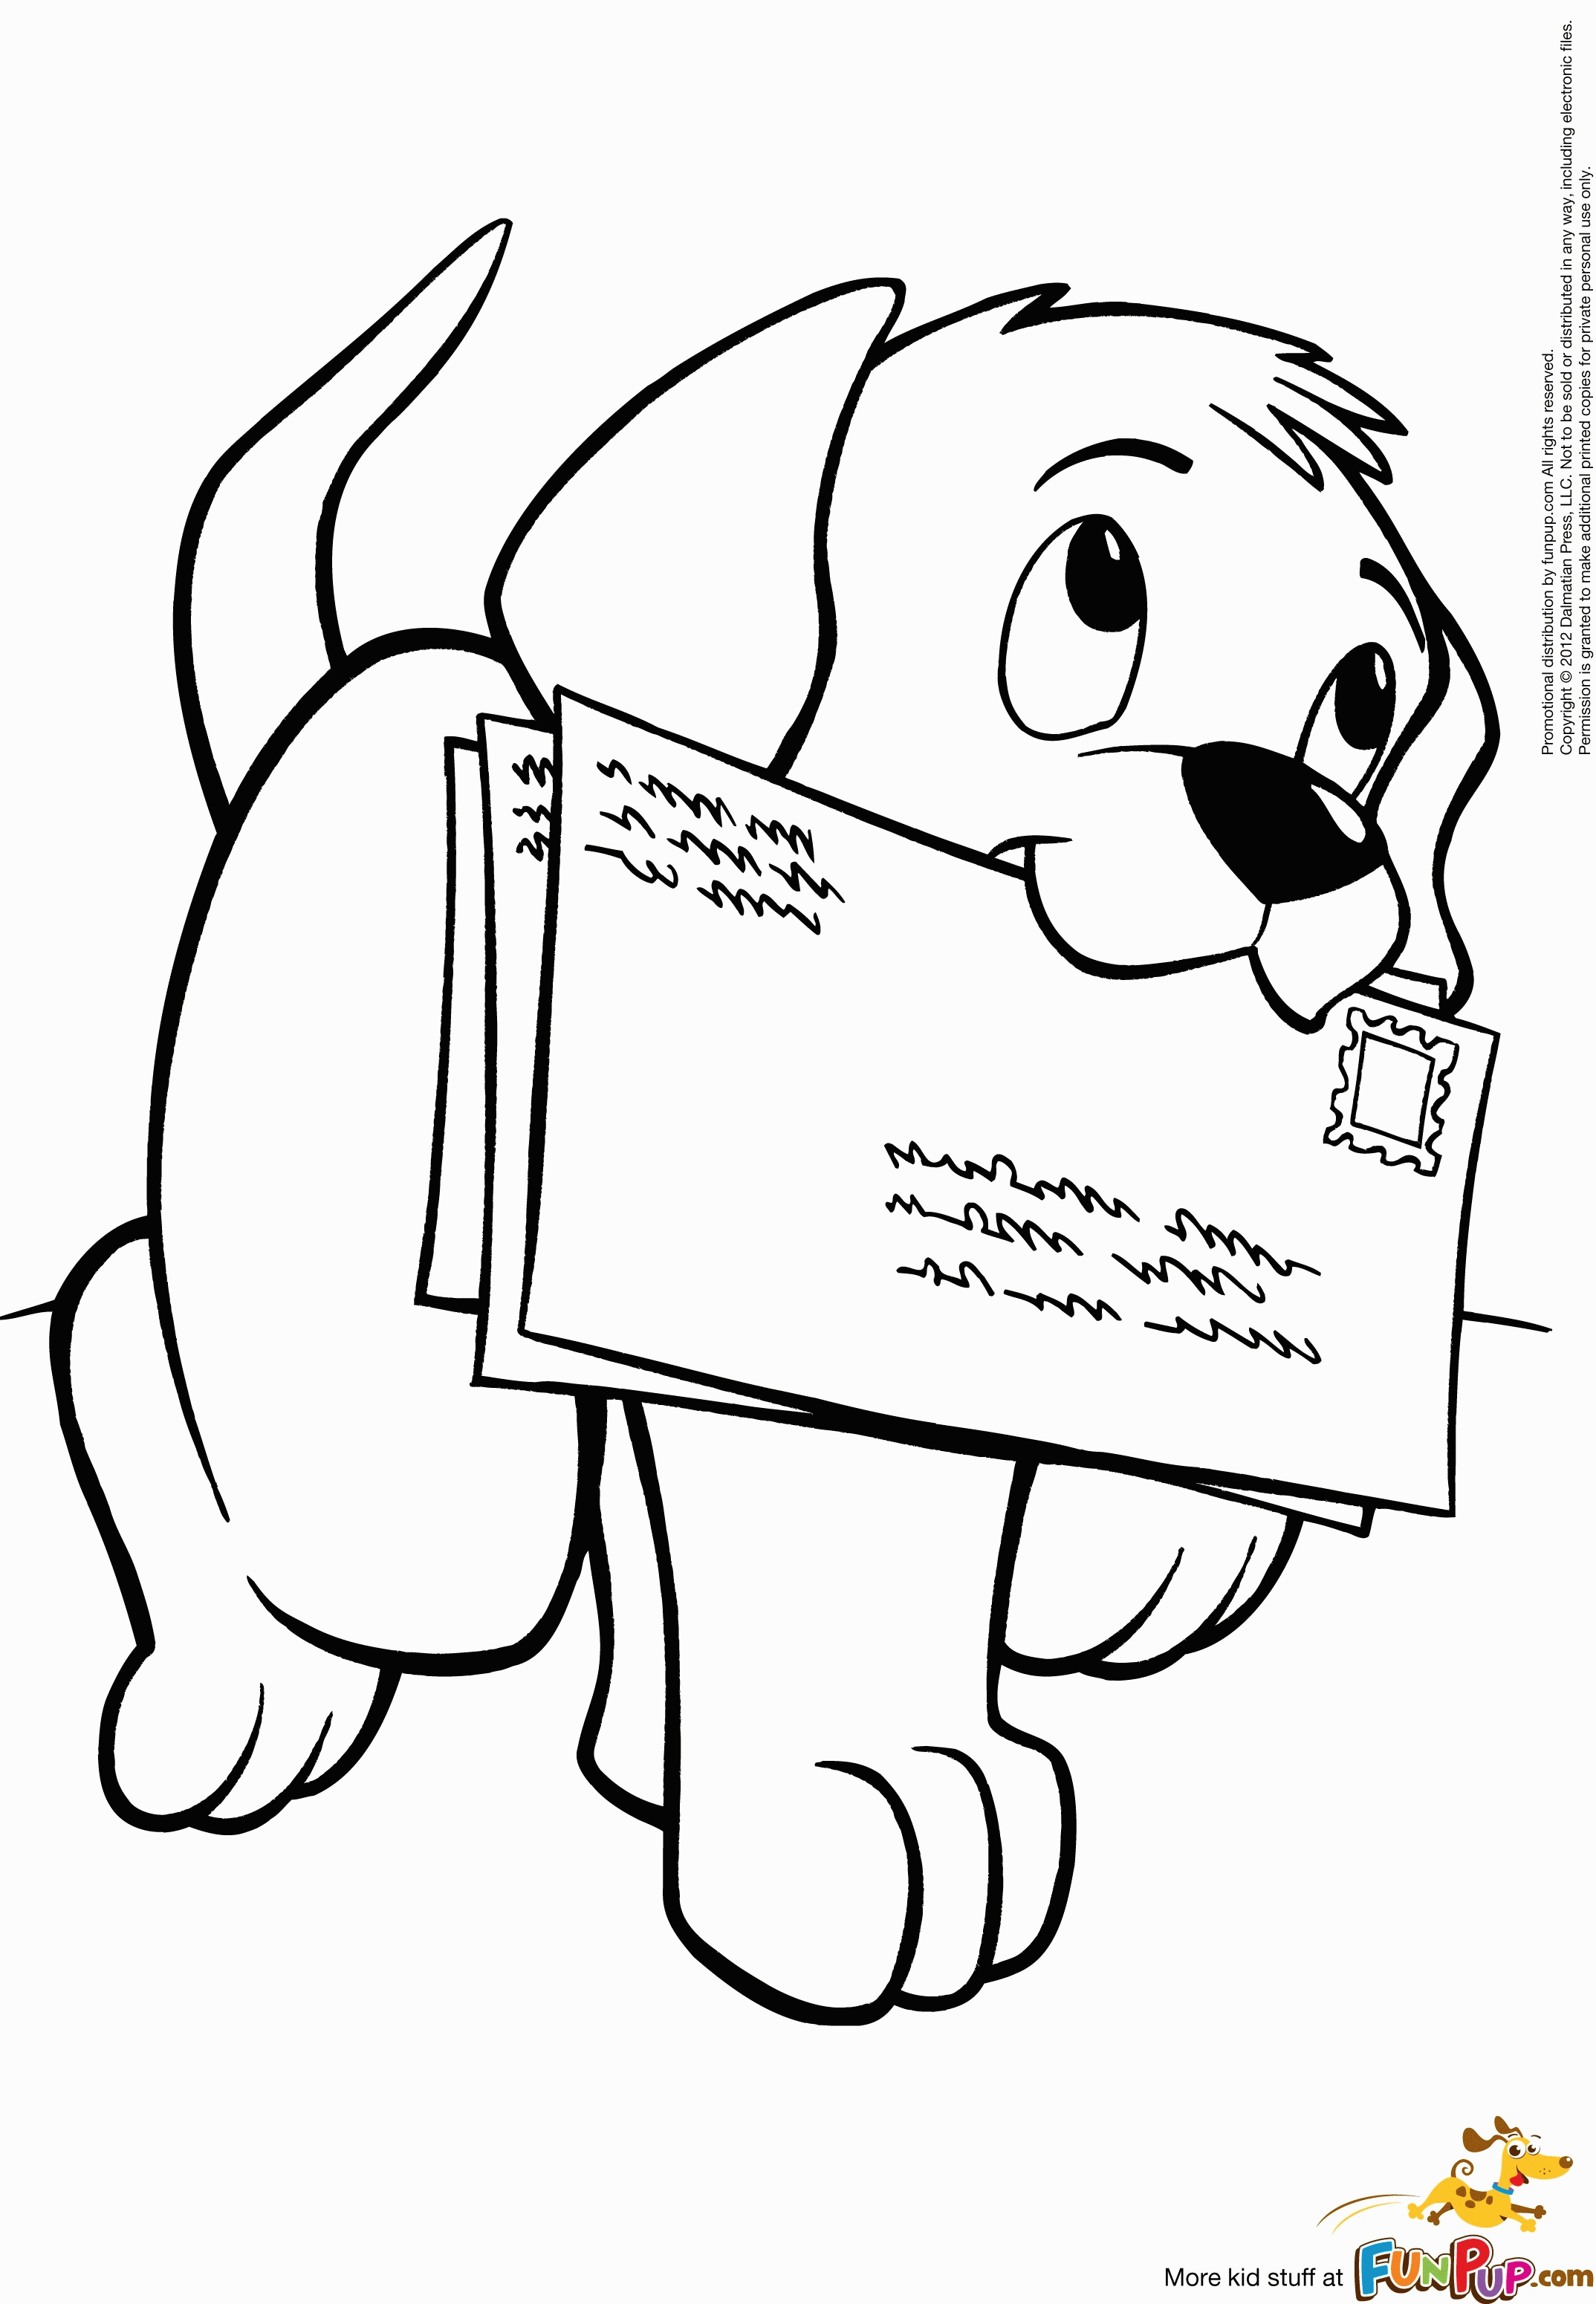 Puppy - Coloring Pages for Kids and for Adults